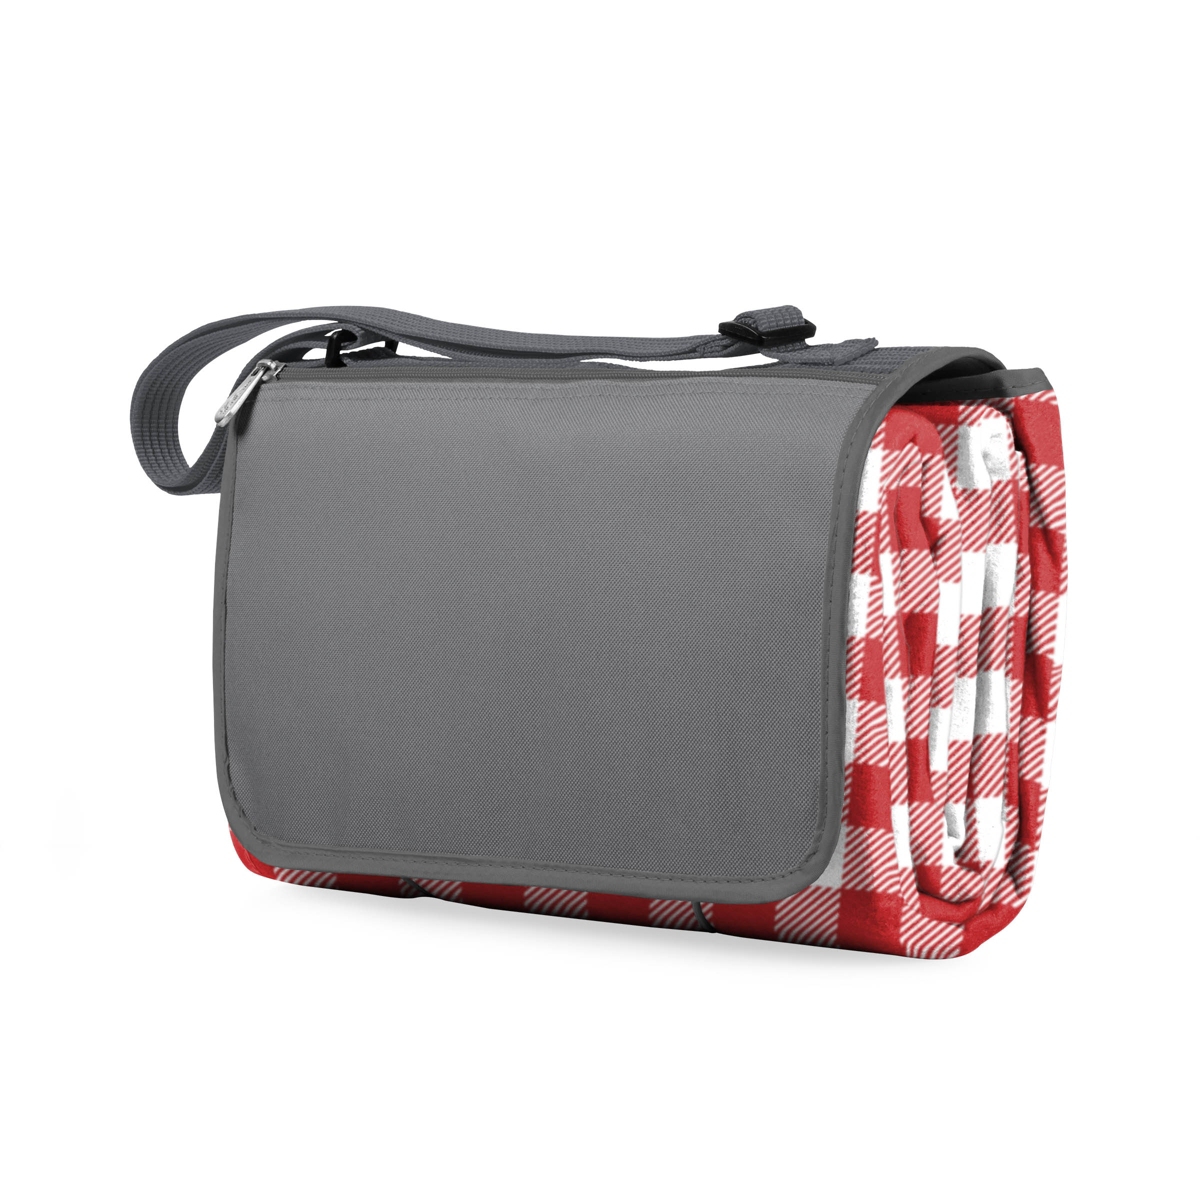 by Picnic Time Blanket Tote Outdoor Picnic Blanket - Red